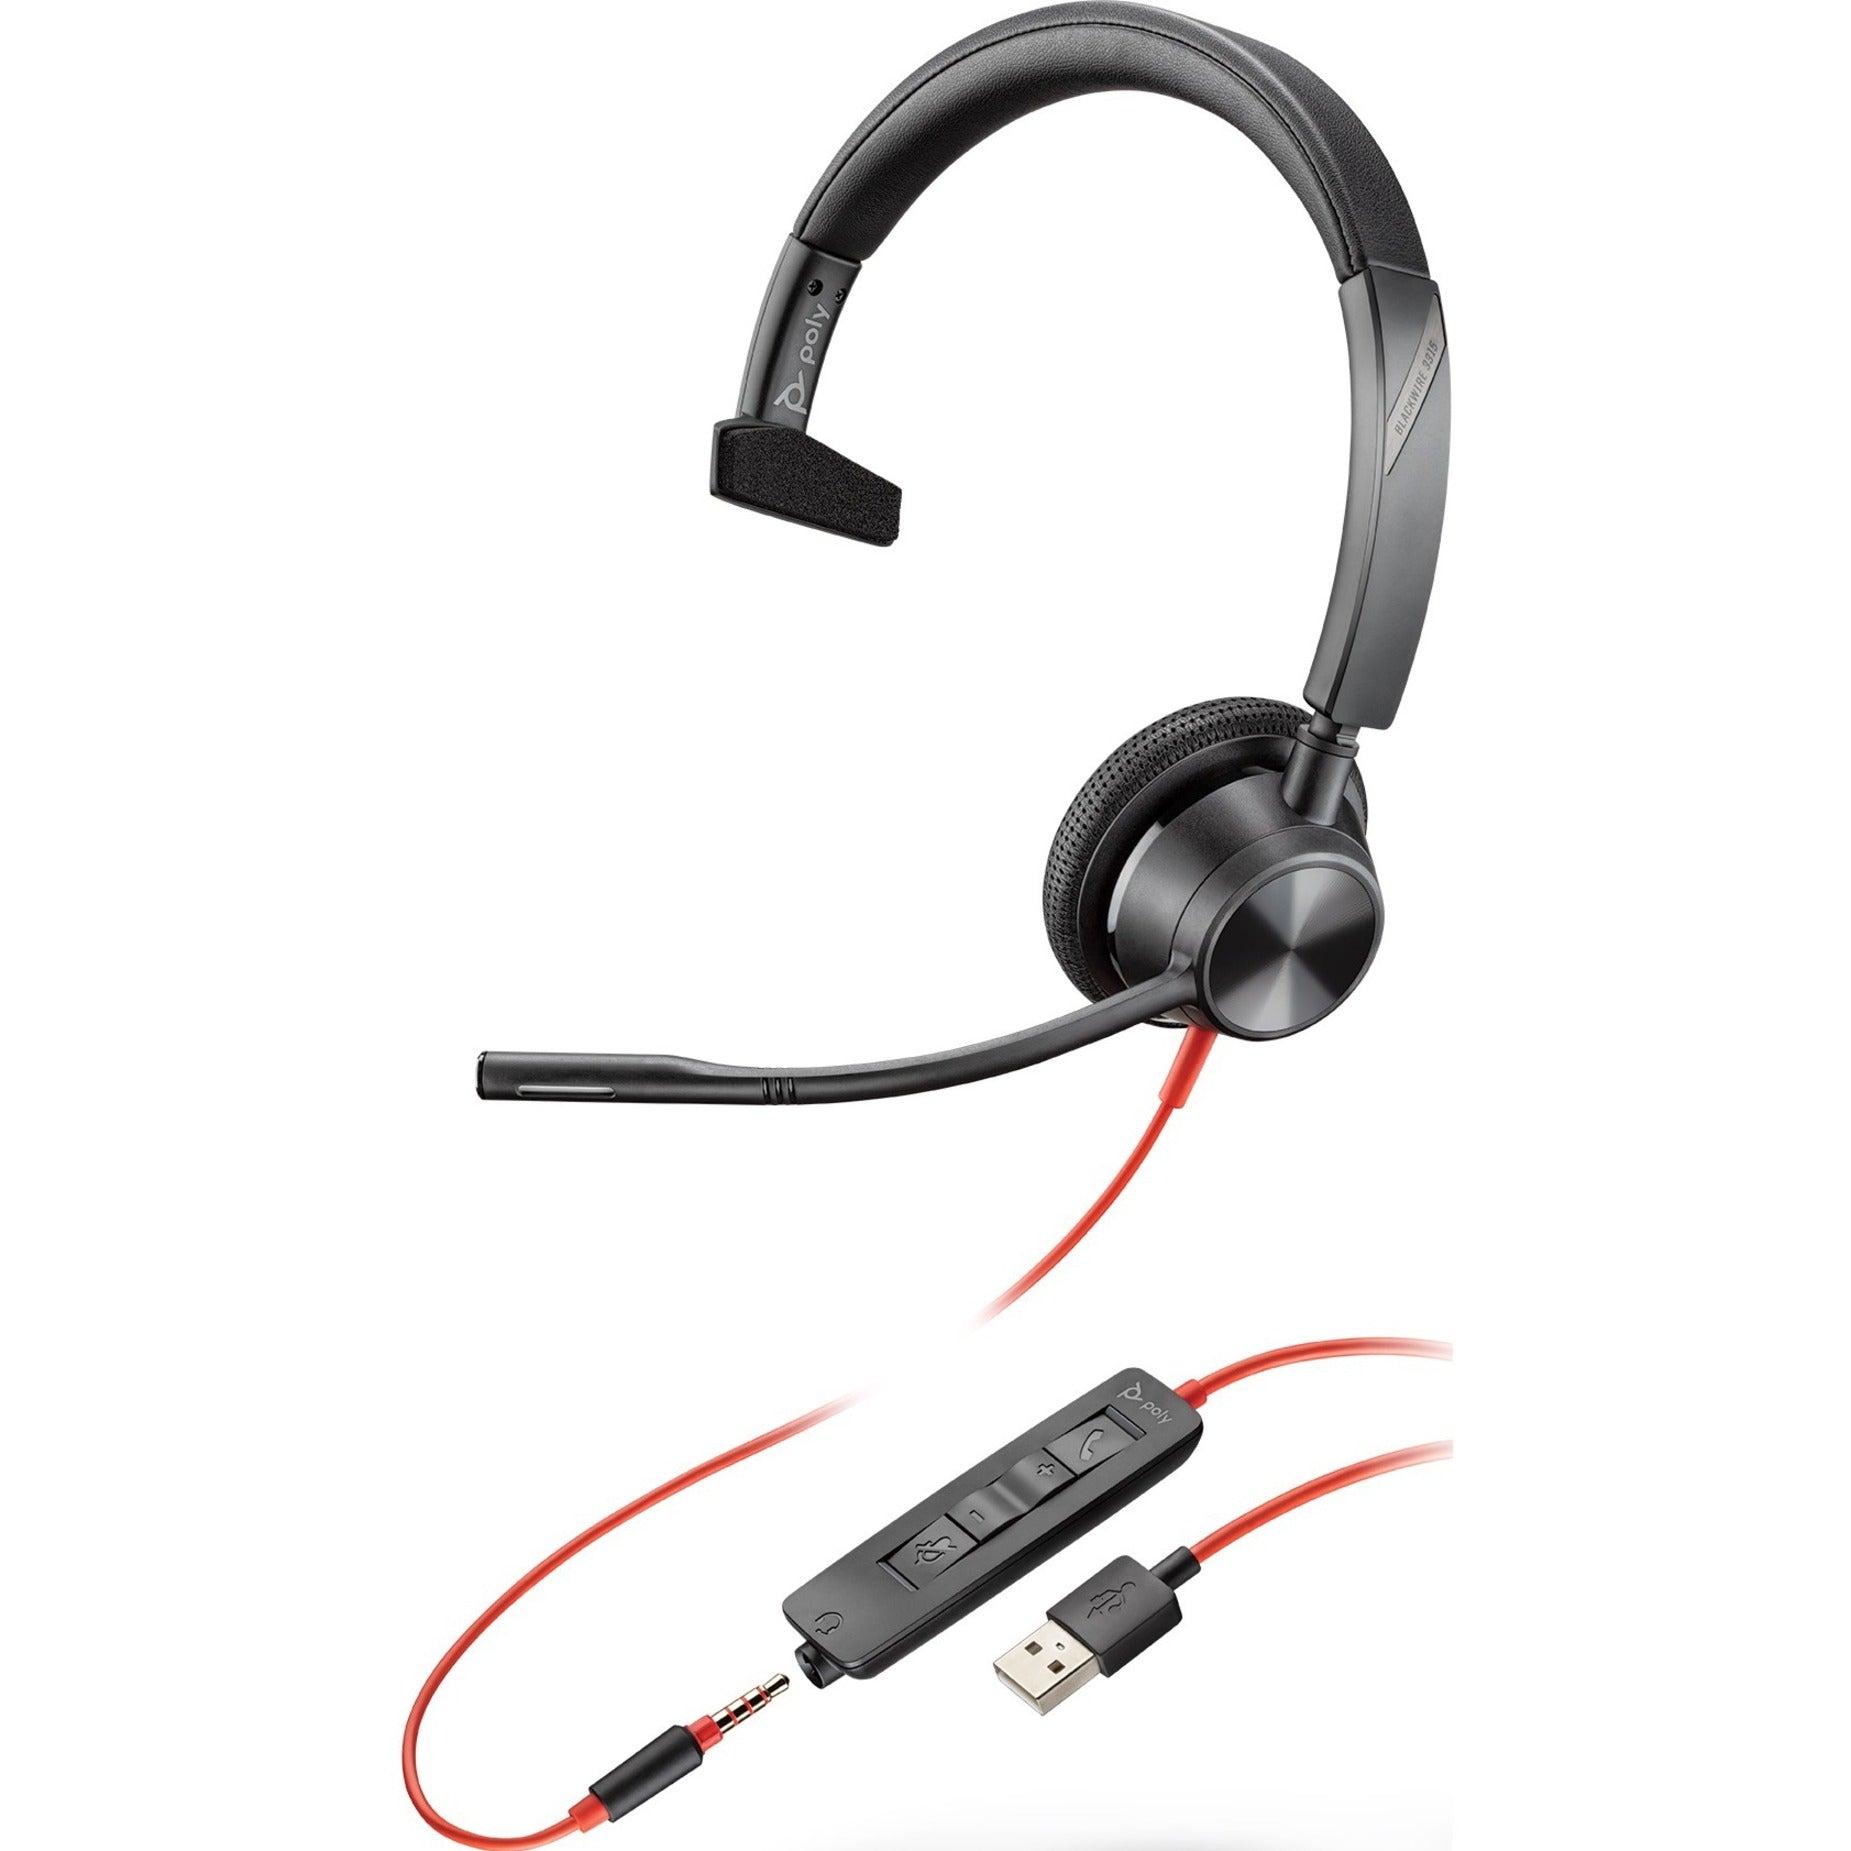 Plantronics 213936-101 Blackwire 3315 USB-A Headset, Monaural Over-the-head Design, Noise Cancelling Microphone